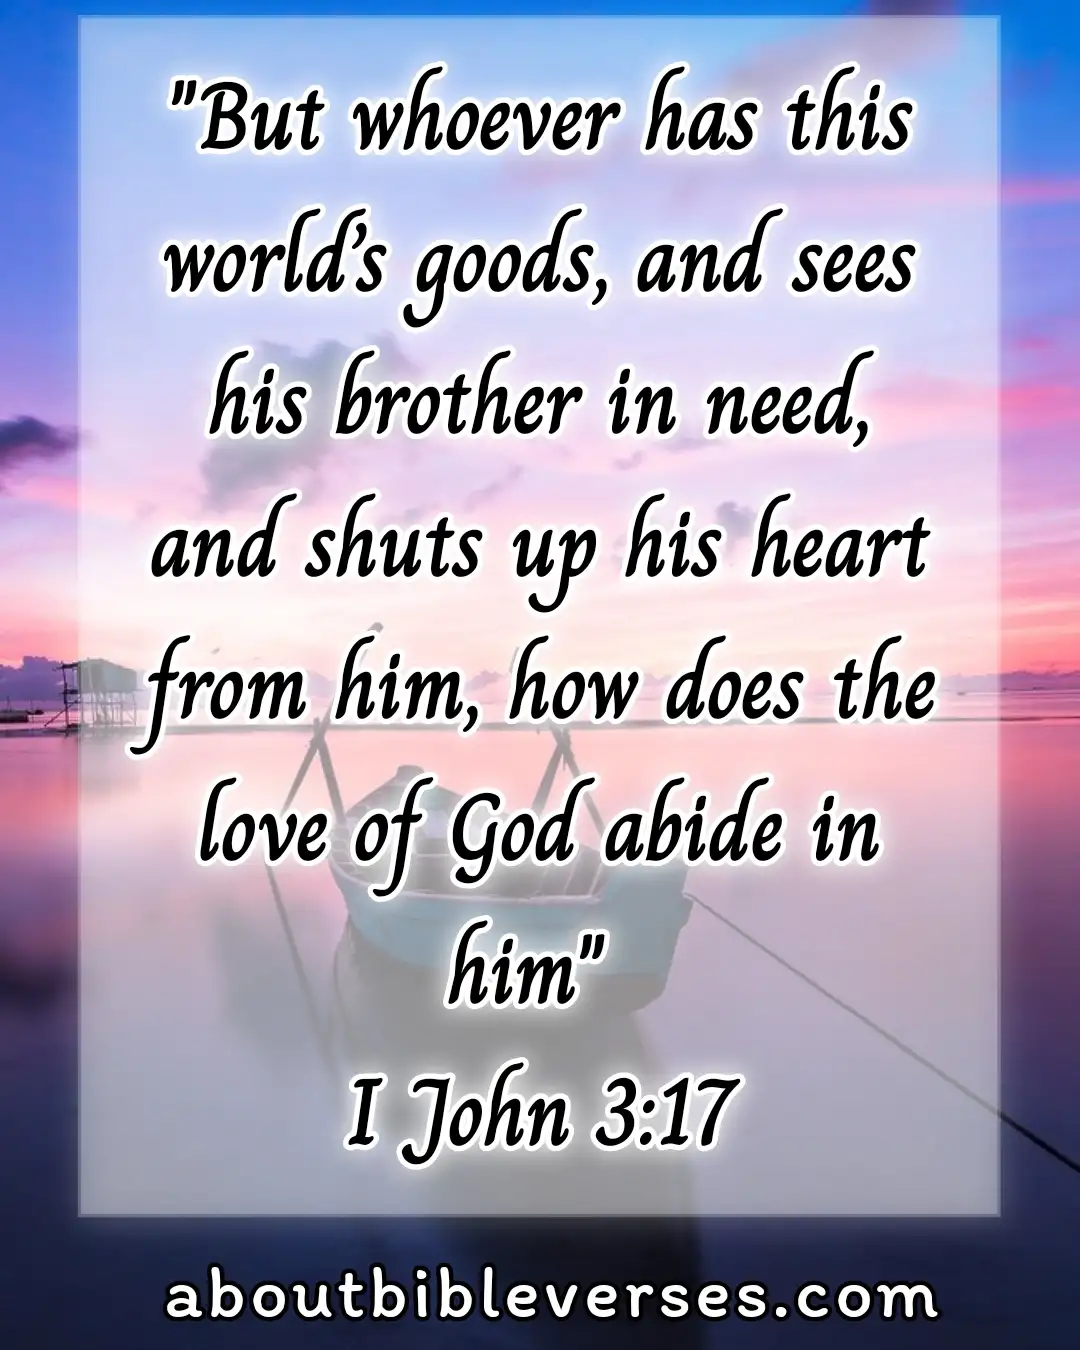 bible verses Helping To others (1 John 3:17)